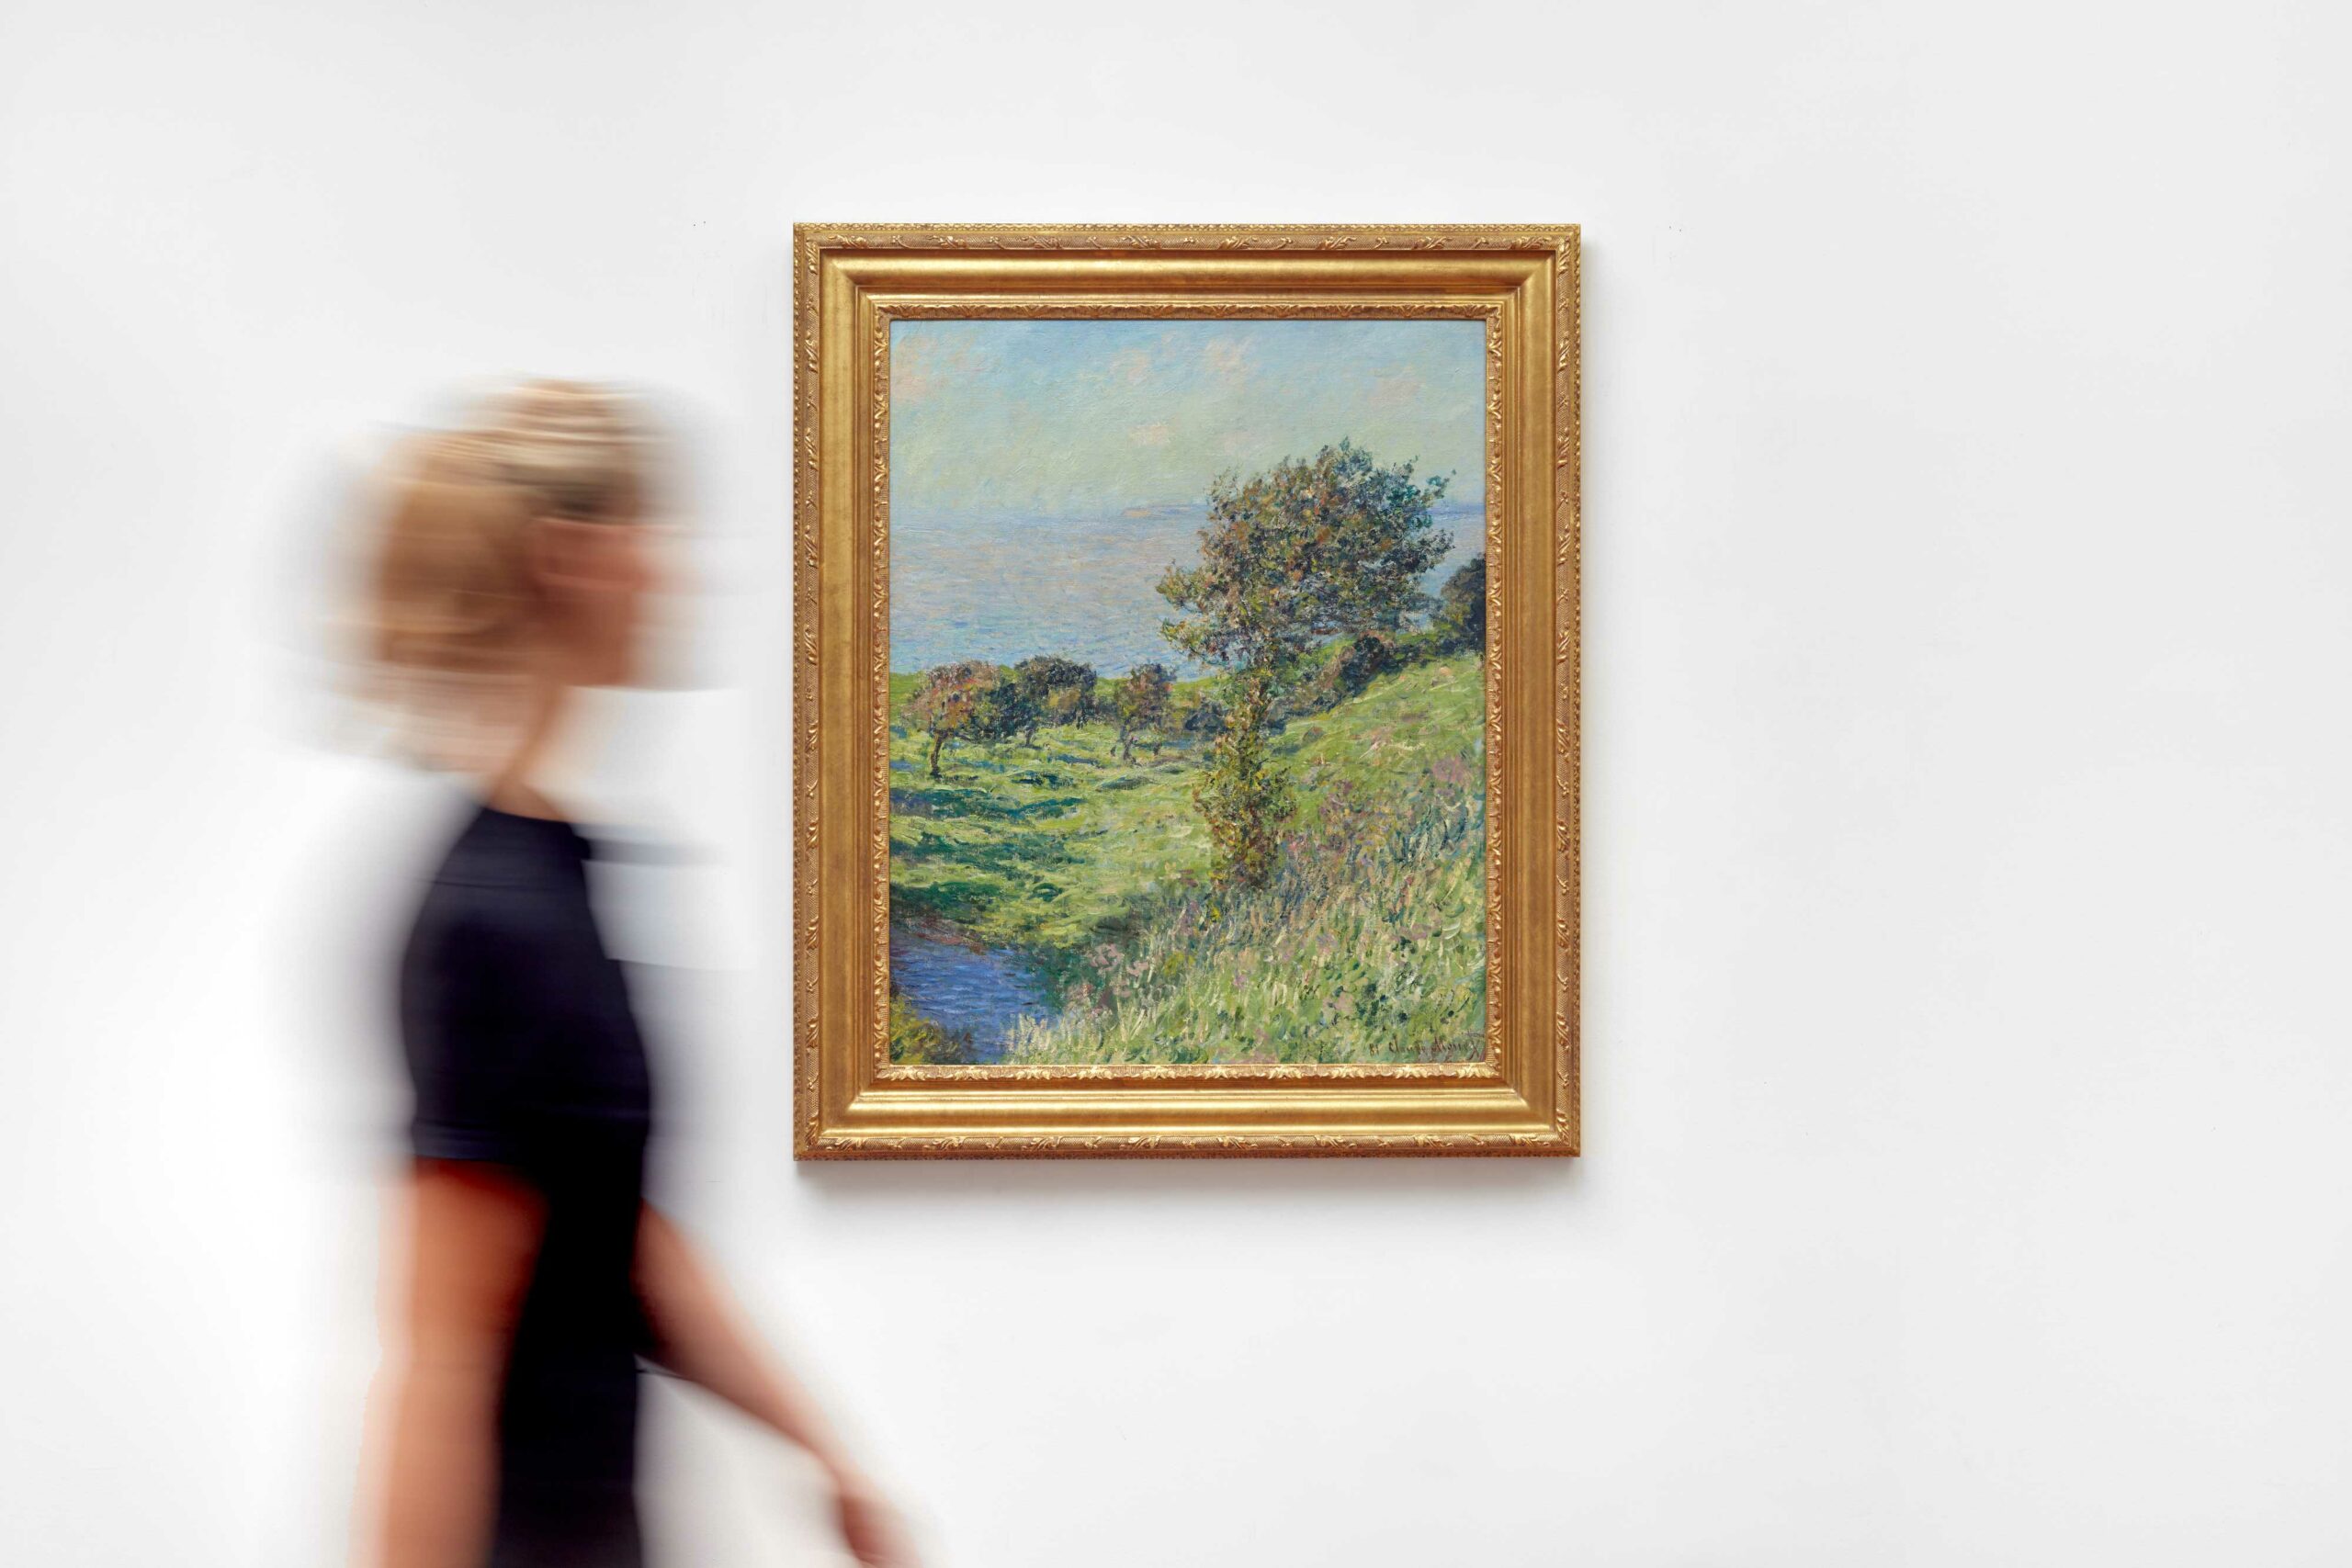 An impressionistic landscape painting by Monet on a white wall with a blurry viewer looking at it.